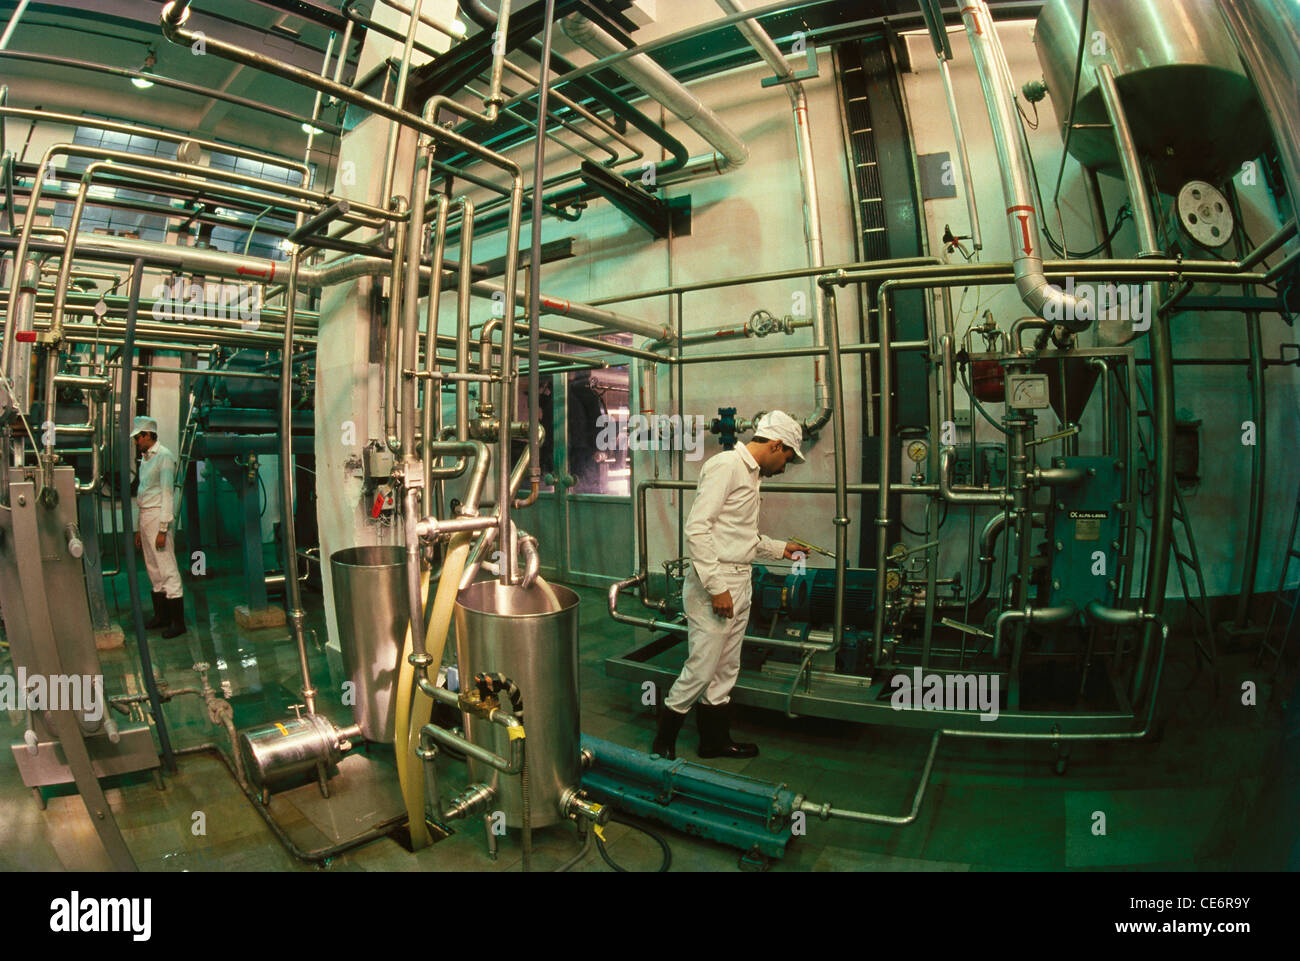 Indian man working in chemical factory ; chemical plant ; industrial process plant manufacture process chemicals ; india ; asia Stock Photo